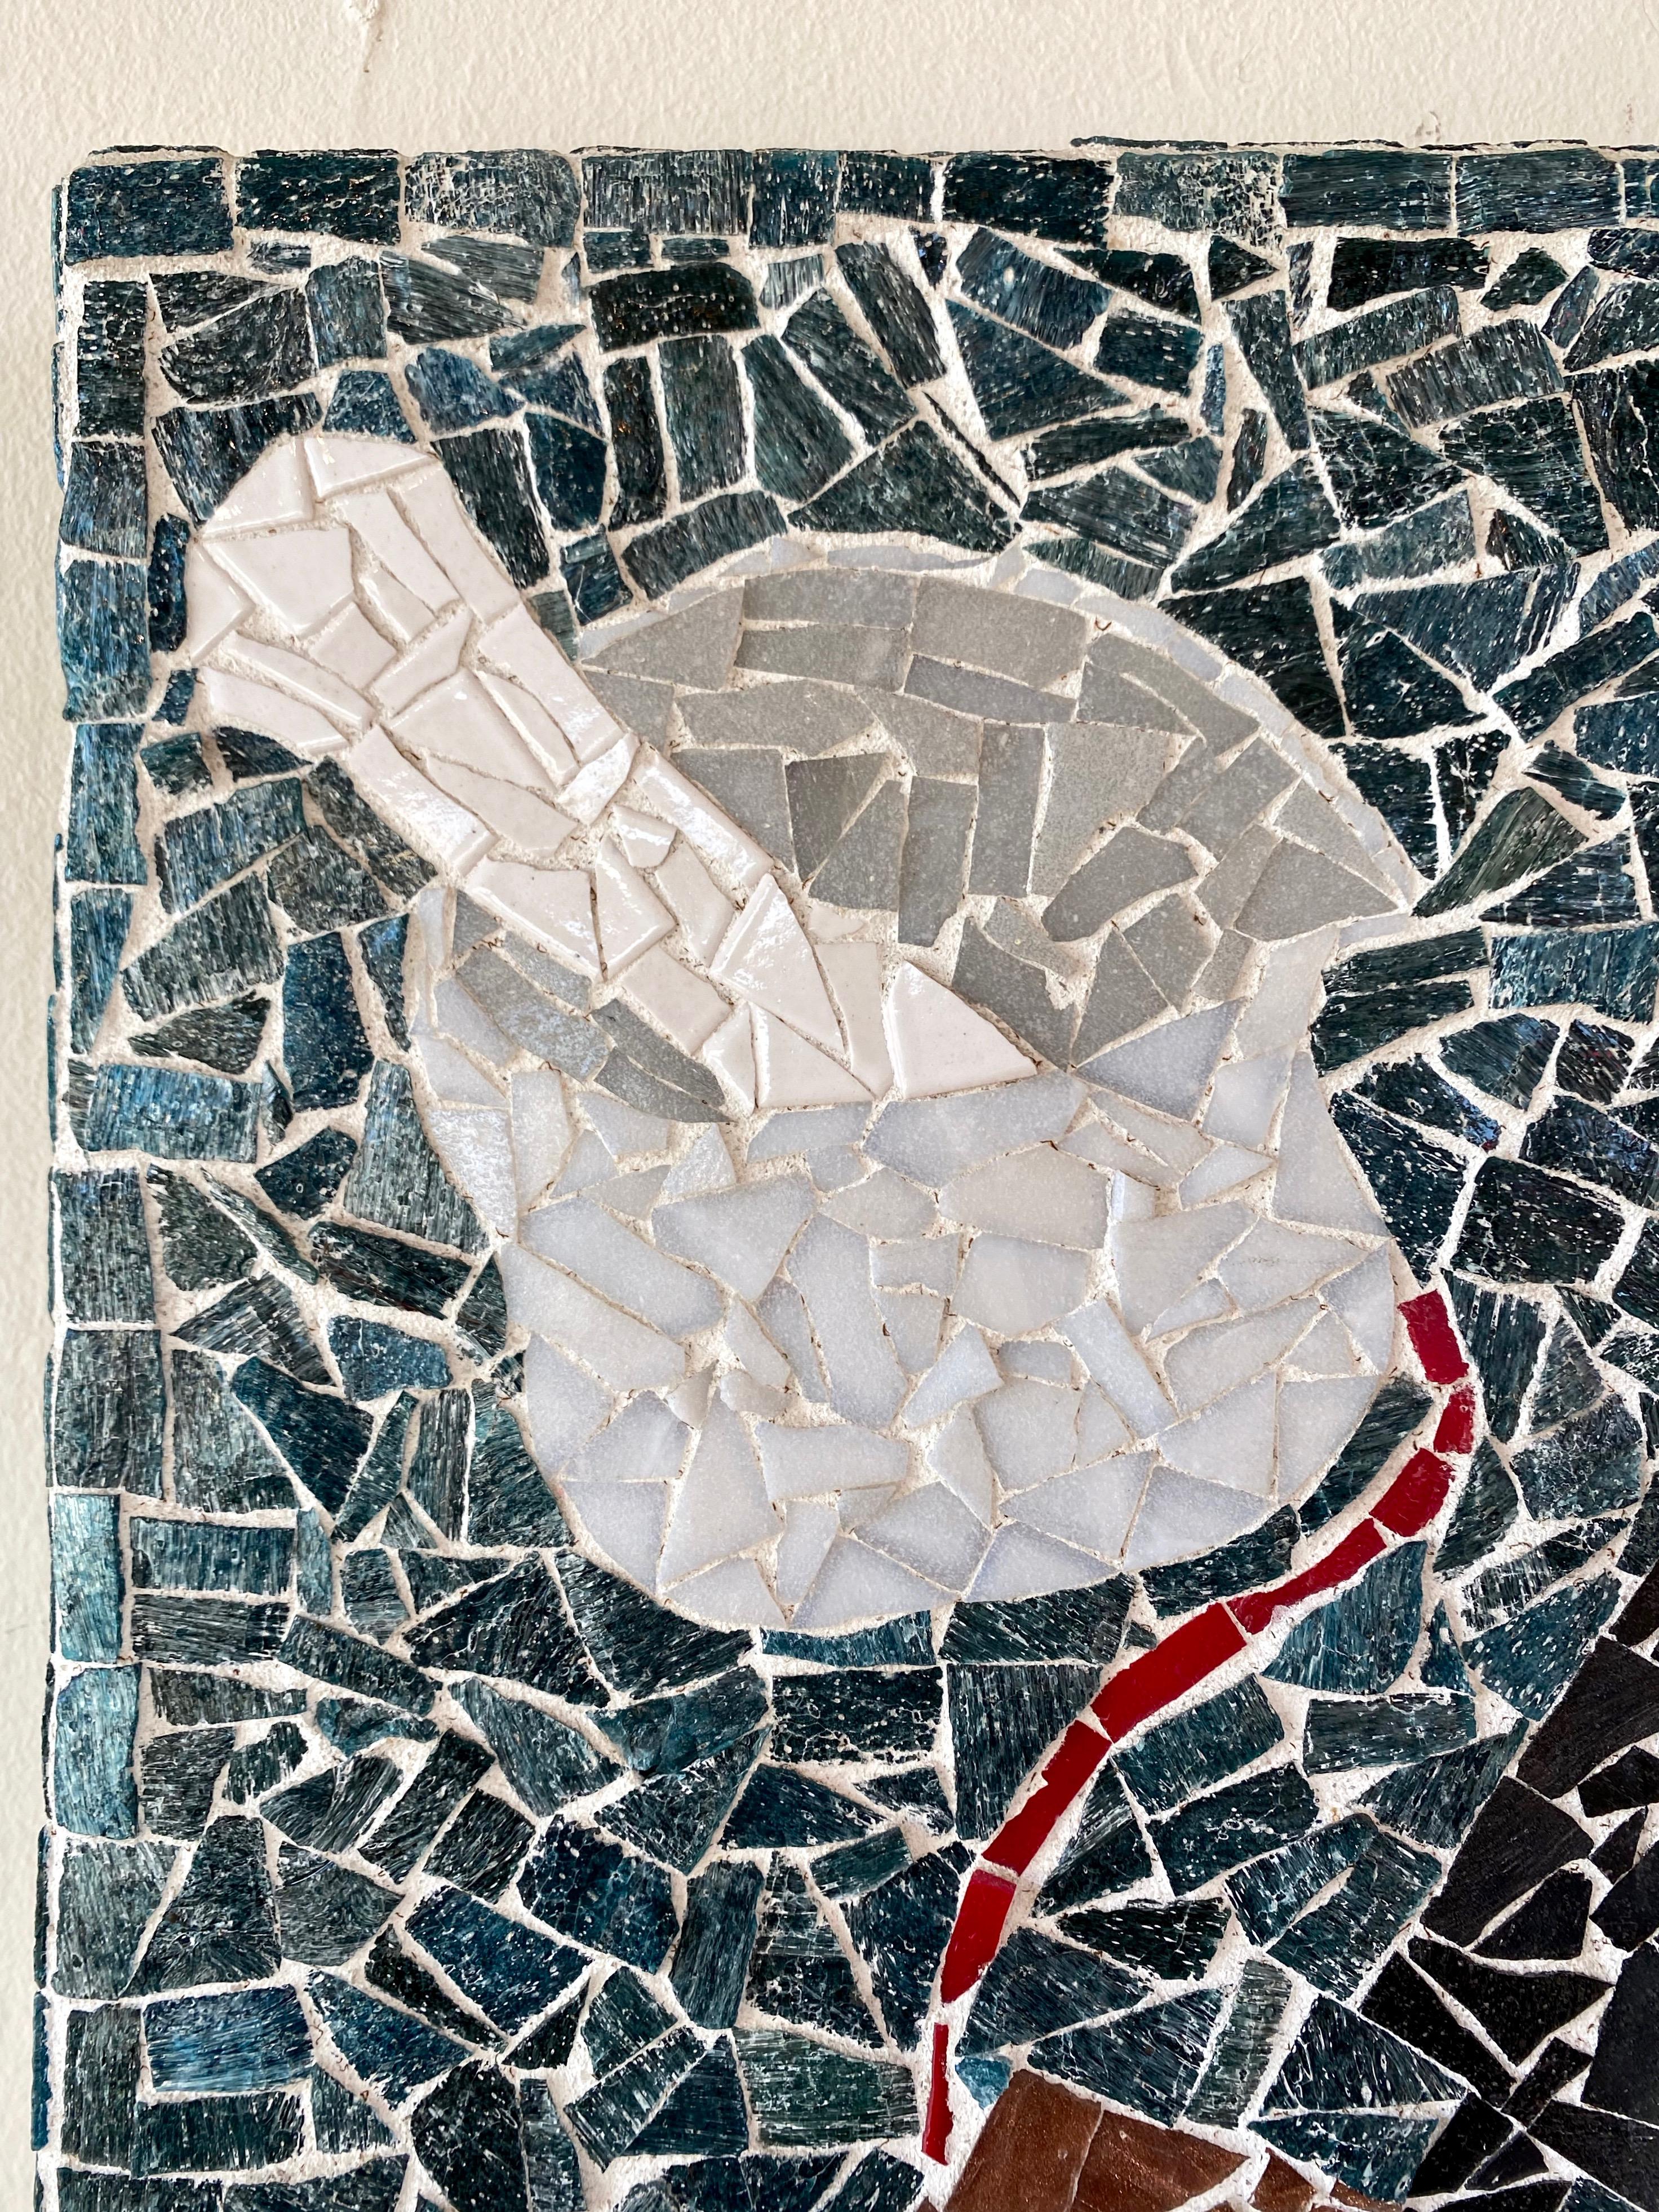 Mid-Century Modern Vintage Apothecary or Pharmacy “Pill Making Process” Glass Tile Mosaic, 1950s